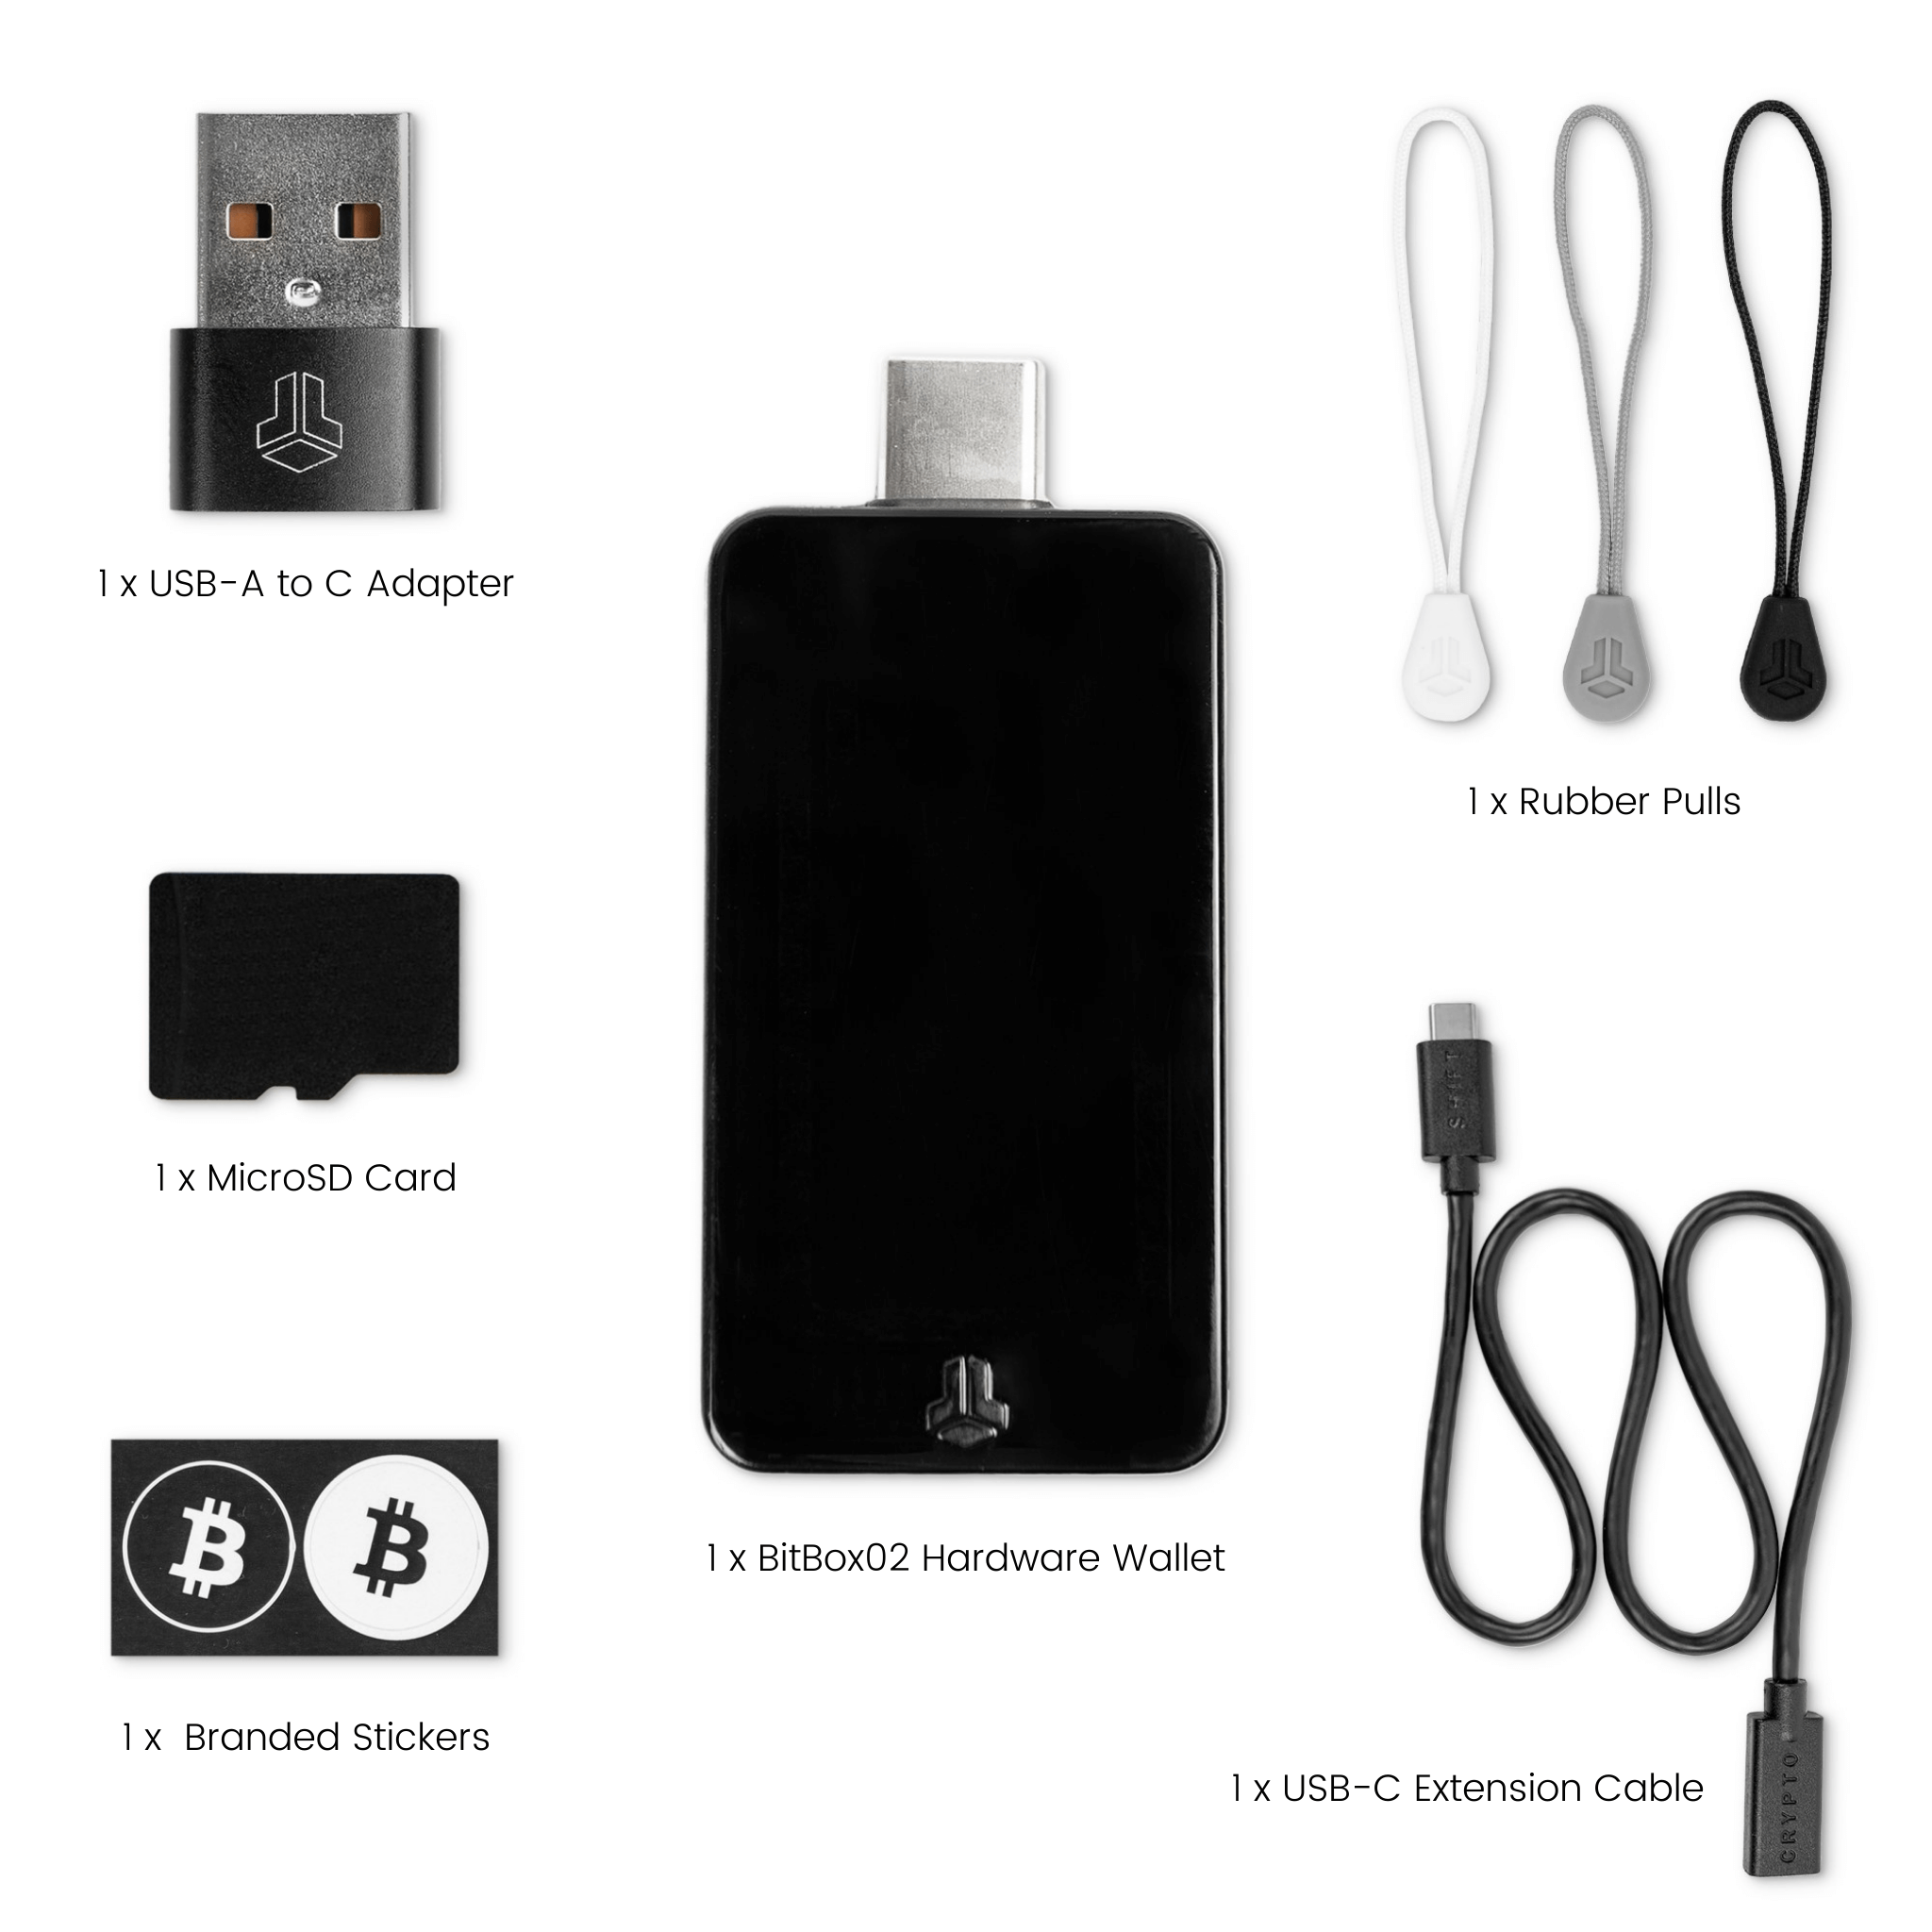 BitBox02 Bitcoin-Only Edition Cryptocurrency Hardware Wallet Package Contents